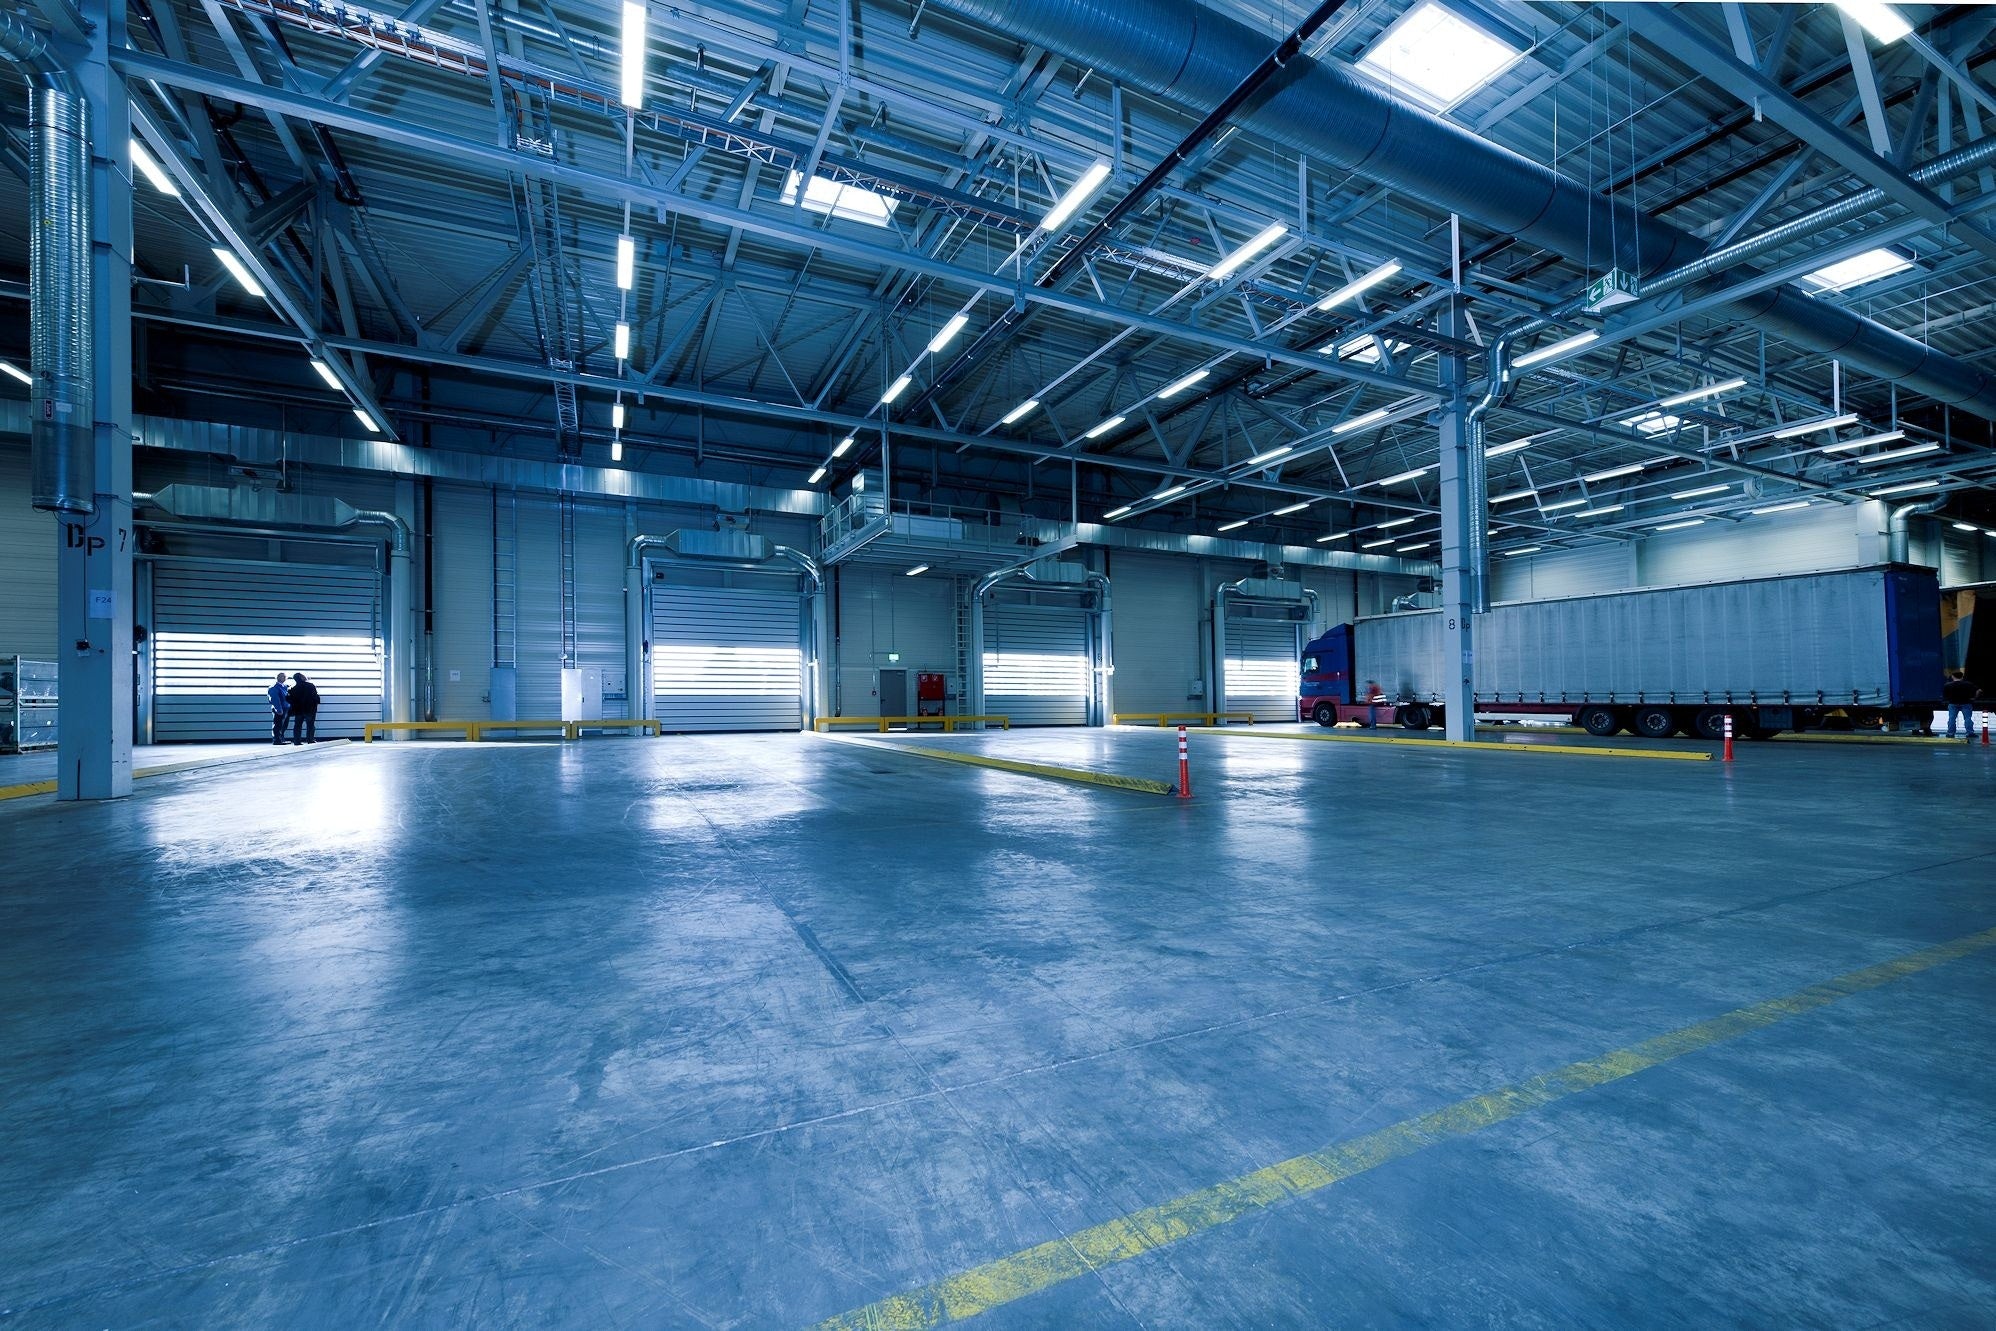 Interior view of a large, empty industrial garage with lineup of overhead and loading dock doors